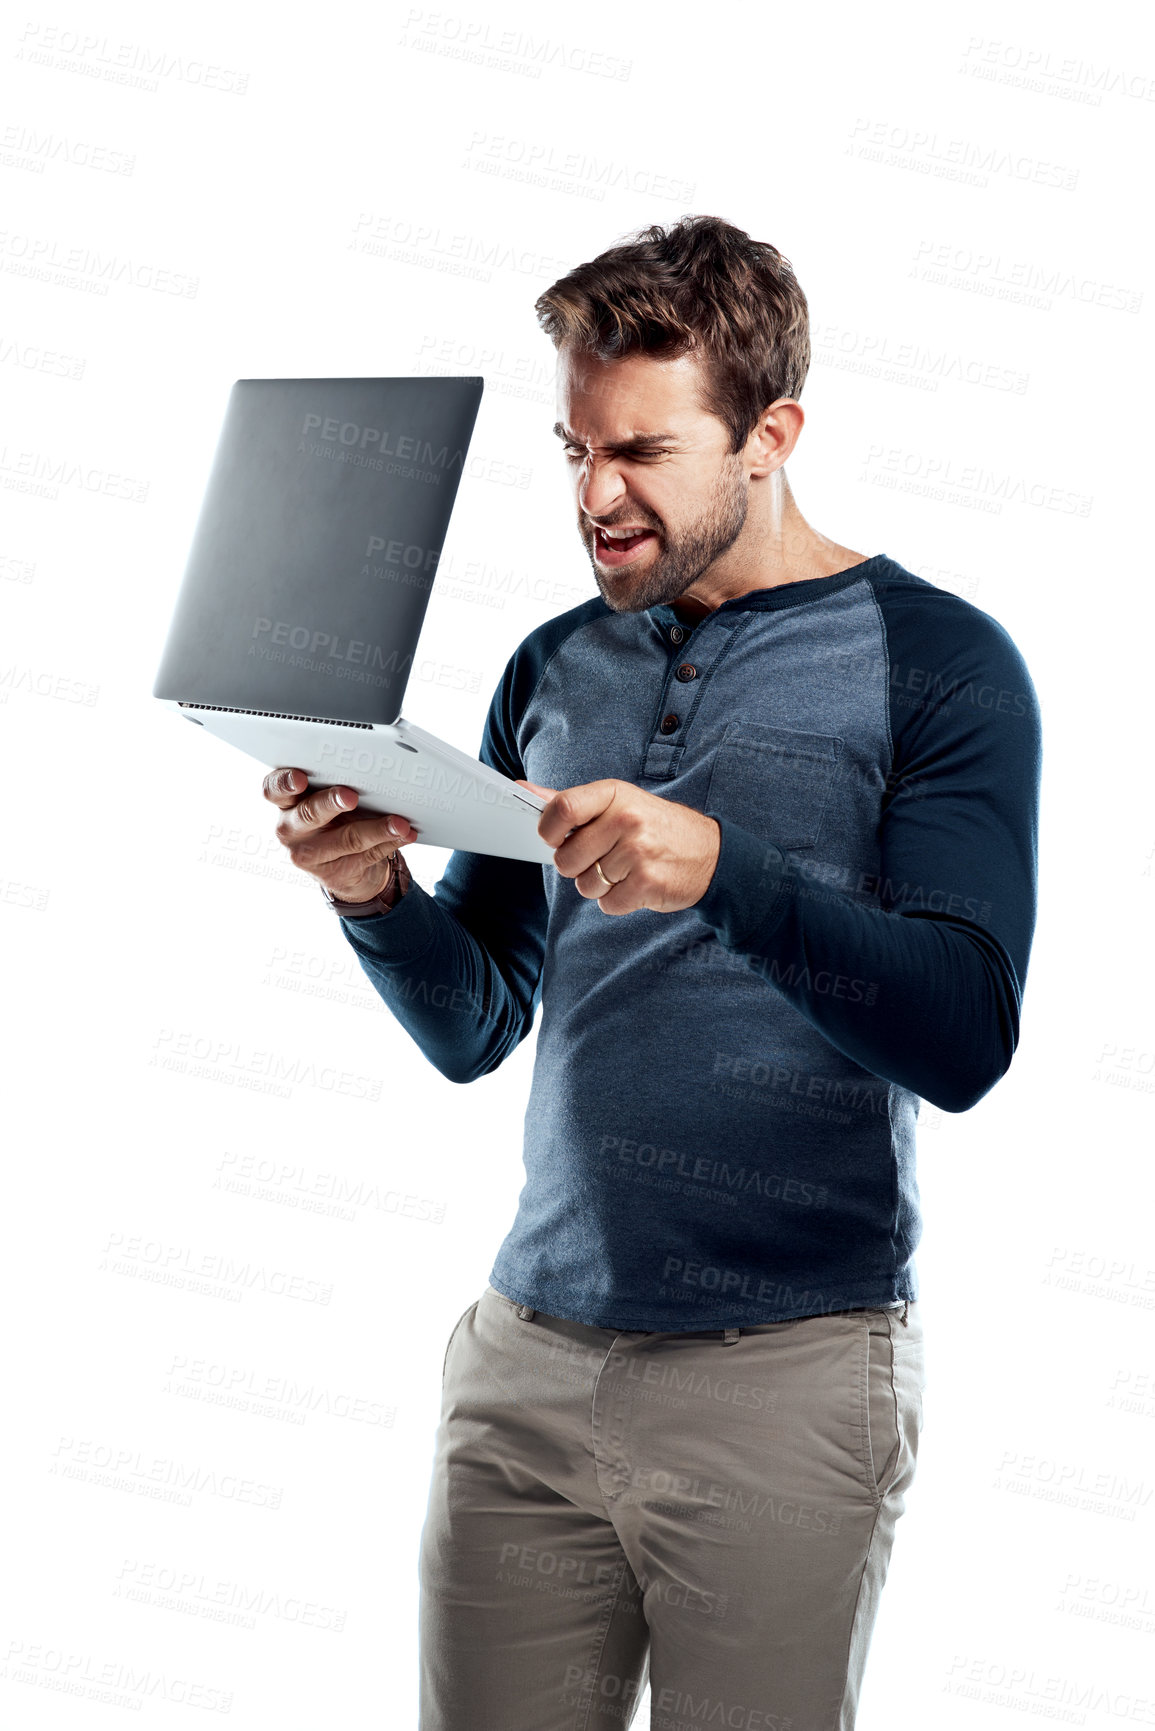 Buy stock photo Studio shot of a handsome young man using a laptop and looking stressed against a white background